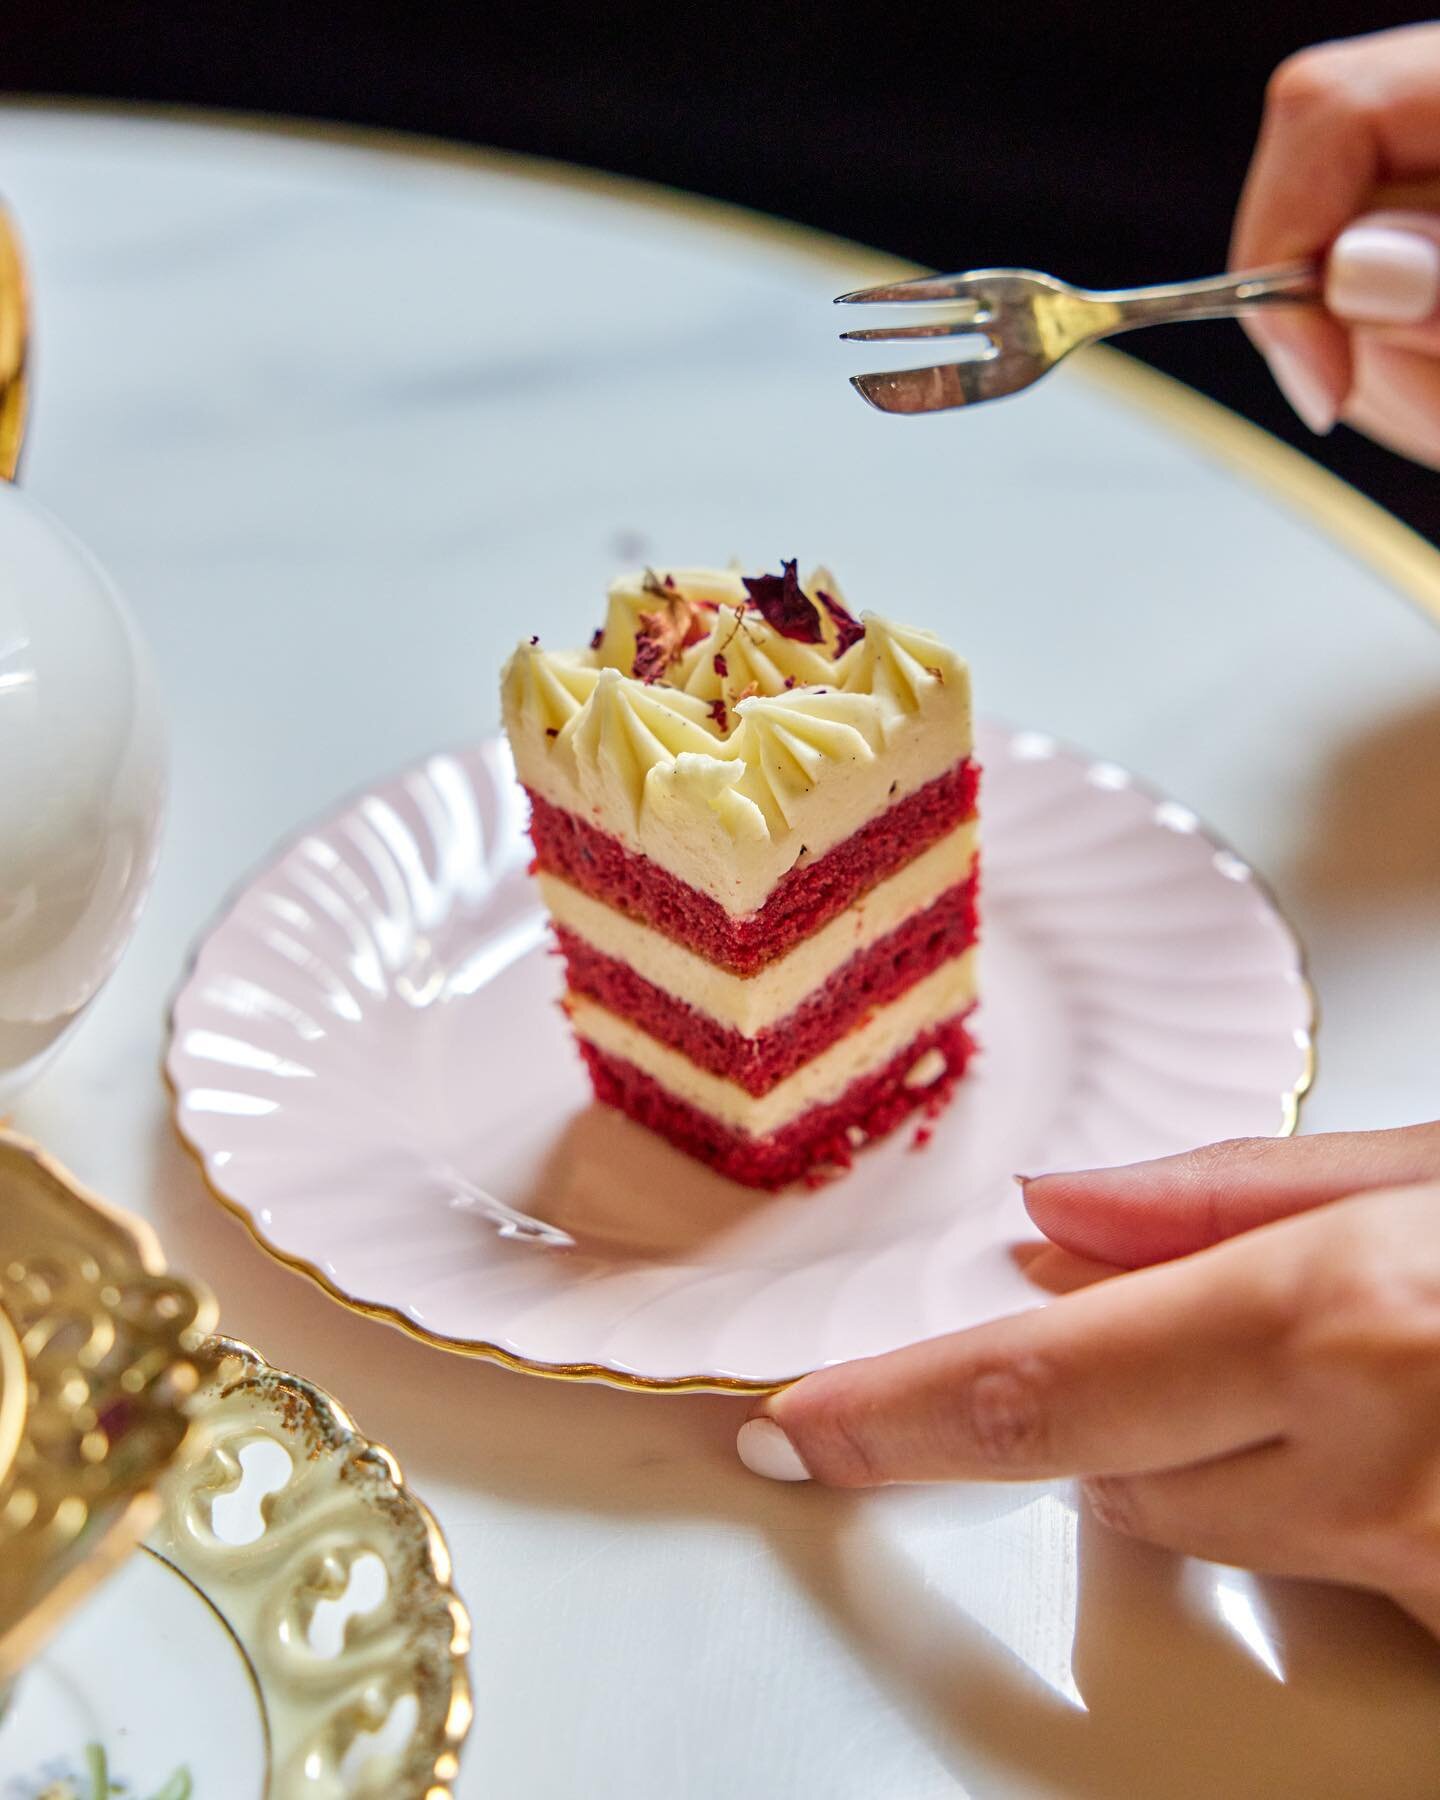 Get stuck in 🤤
Layered red velvet slice with vanilla cream frosting! Perfect for an afternoon treat.

Photo by: @dancastano for @whatsonmelb